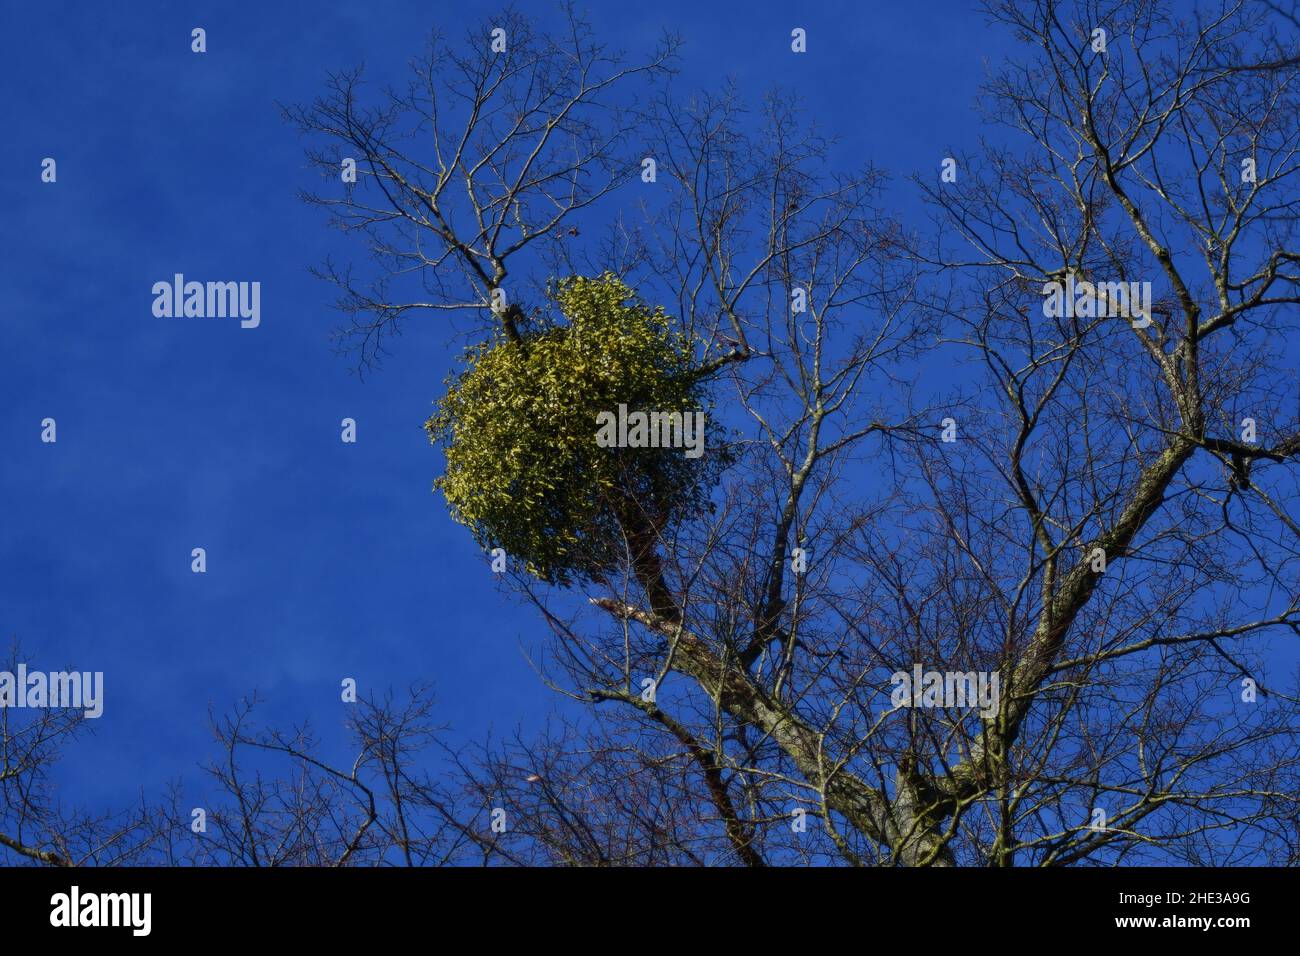 A mass of mistletoe, Viscum album, growing a sparce tree taken on sunny winters day Stock Photo